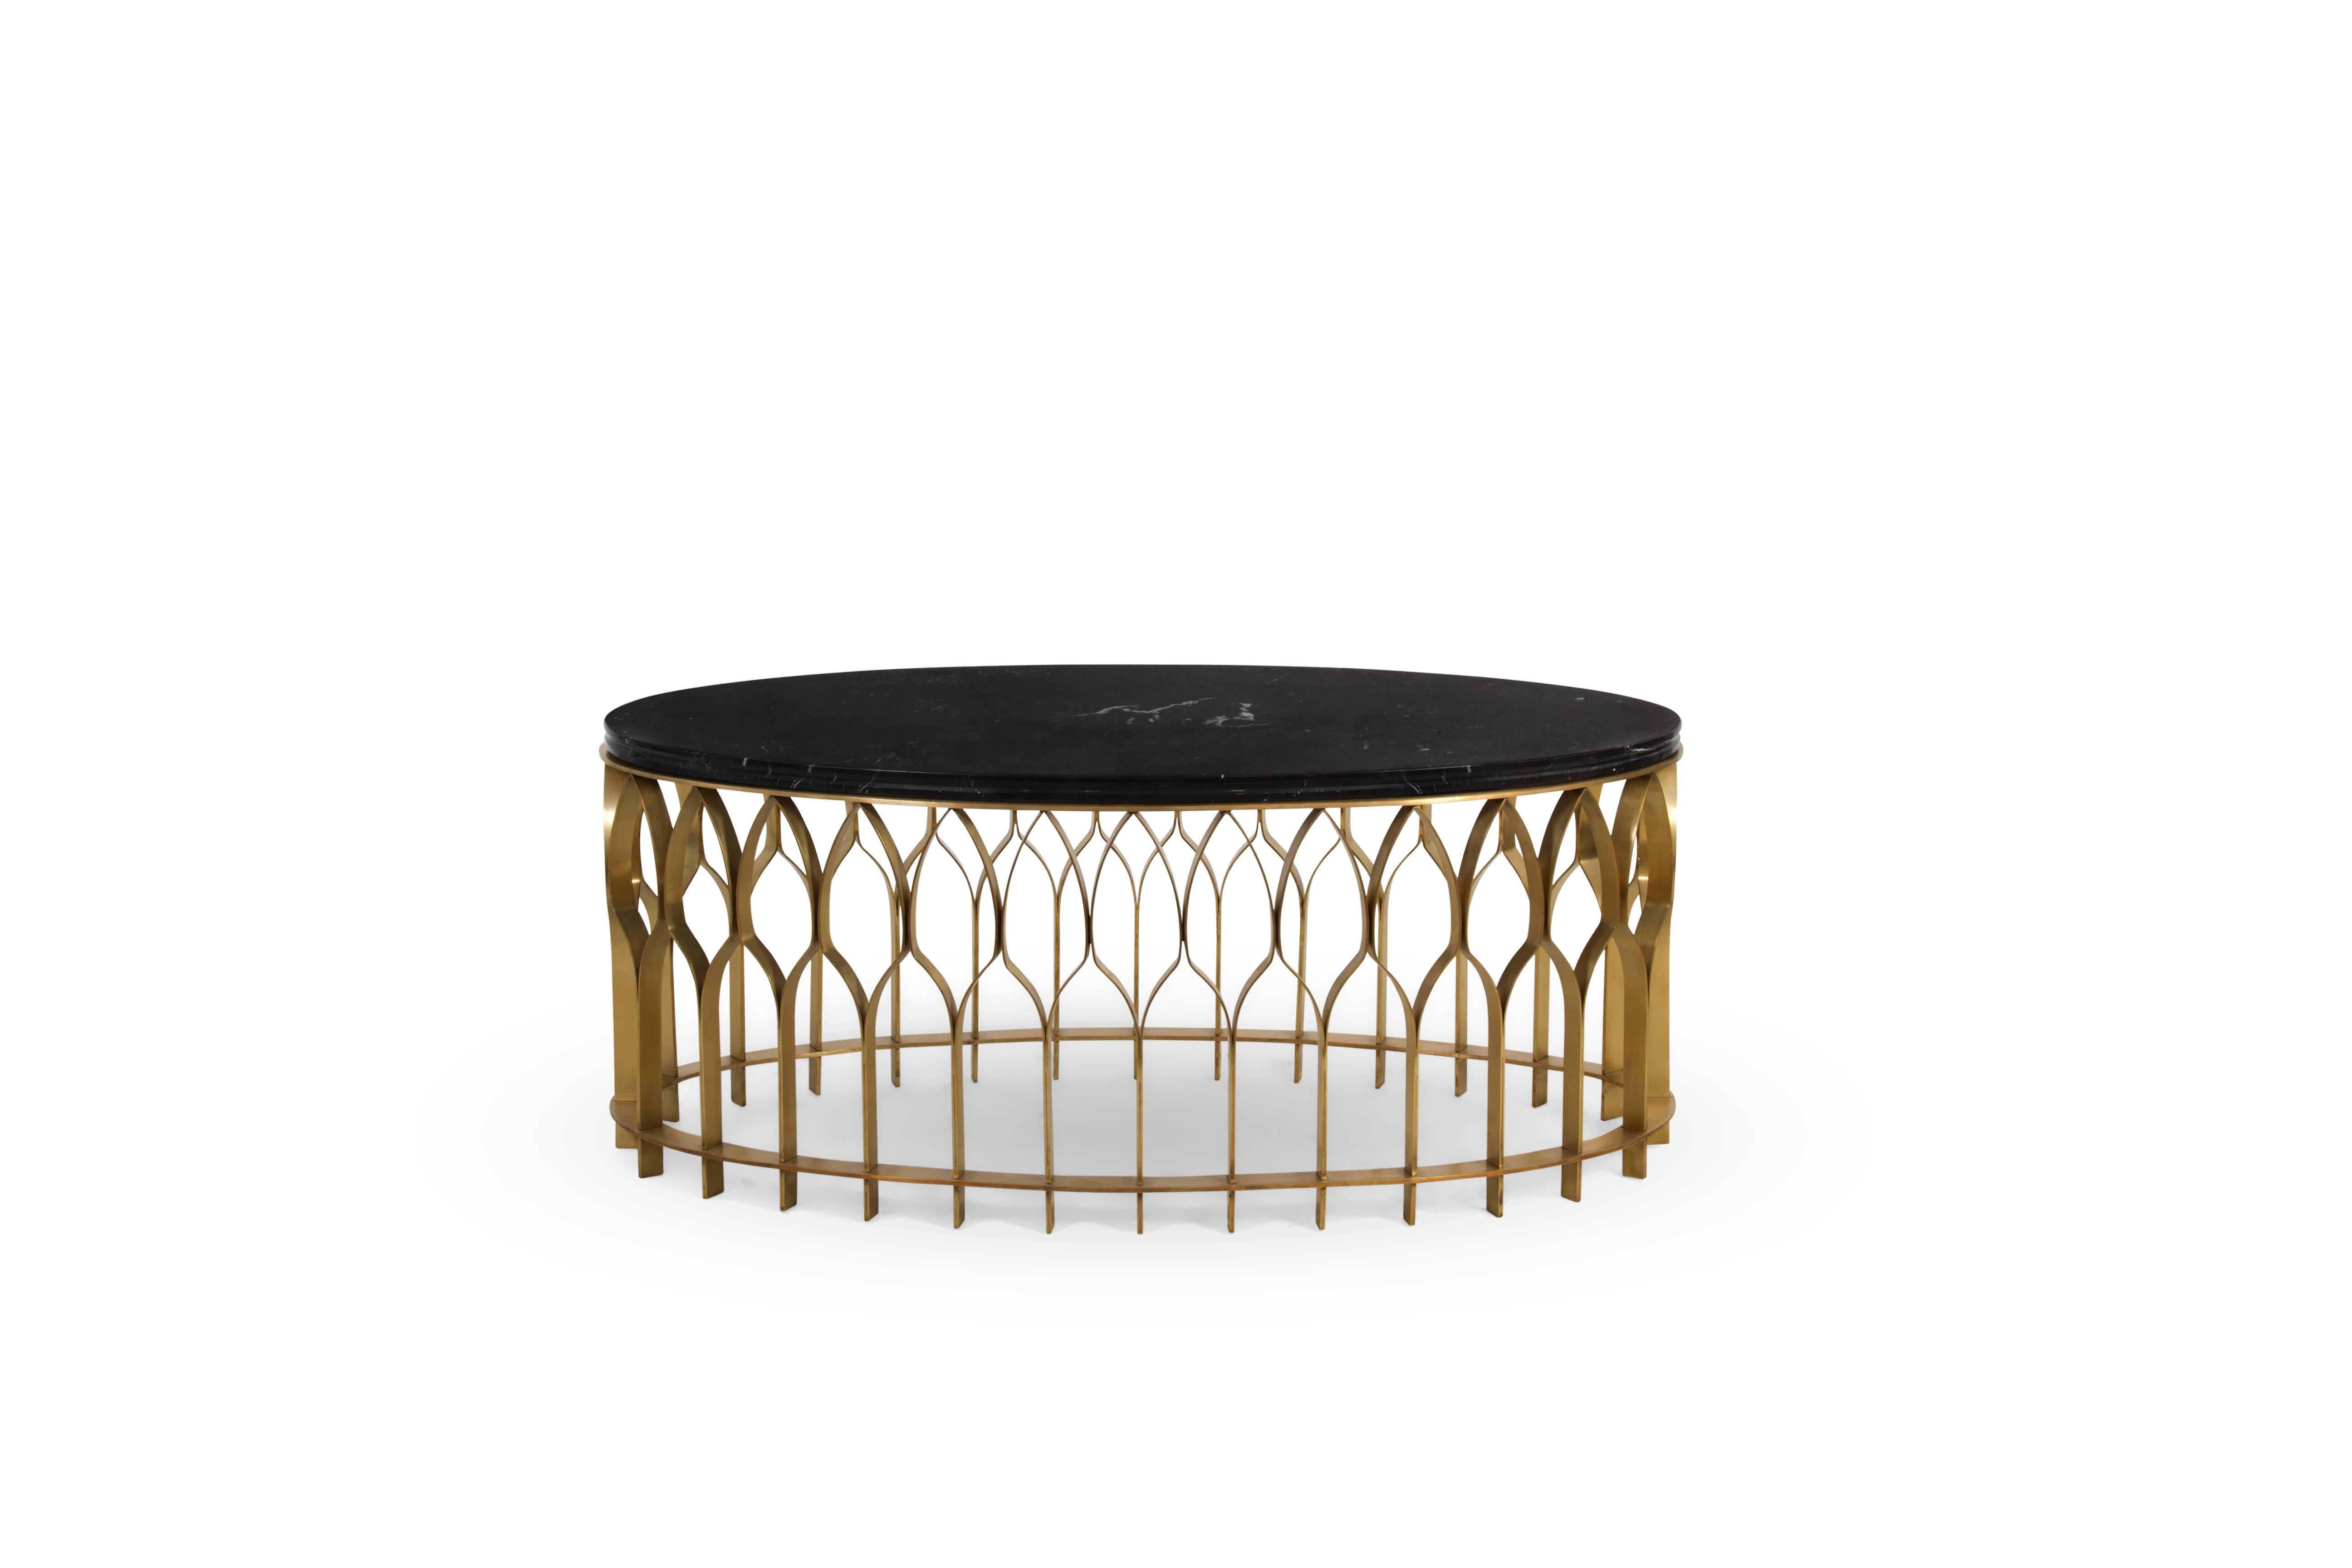 Contemporary European modern Black Marble and Brushed Brass Round Coffee Table by Brabbu For Sale